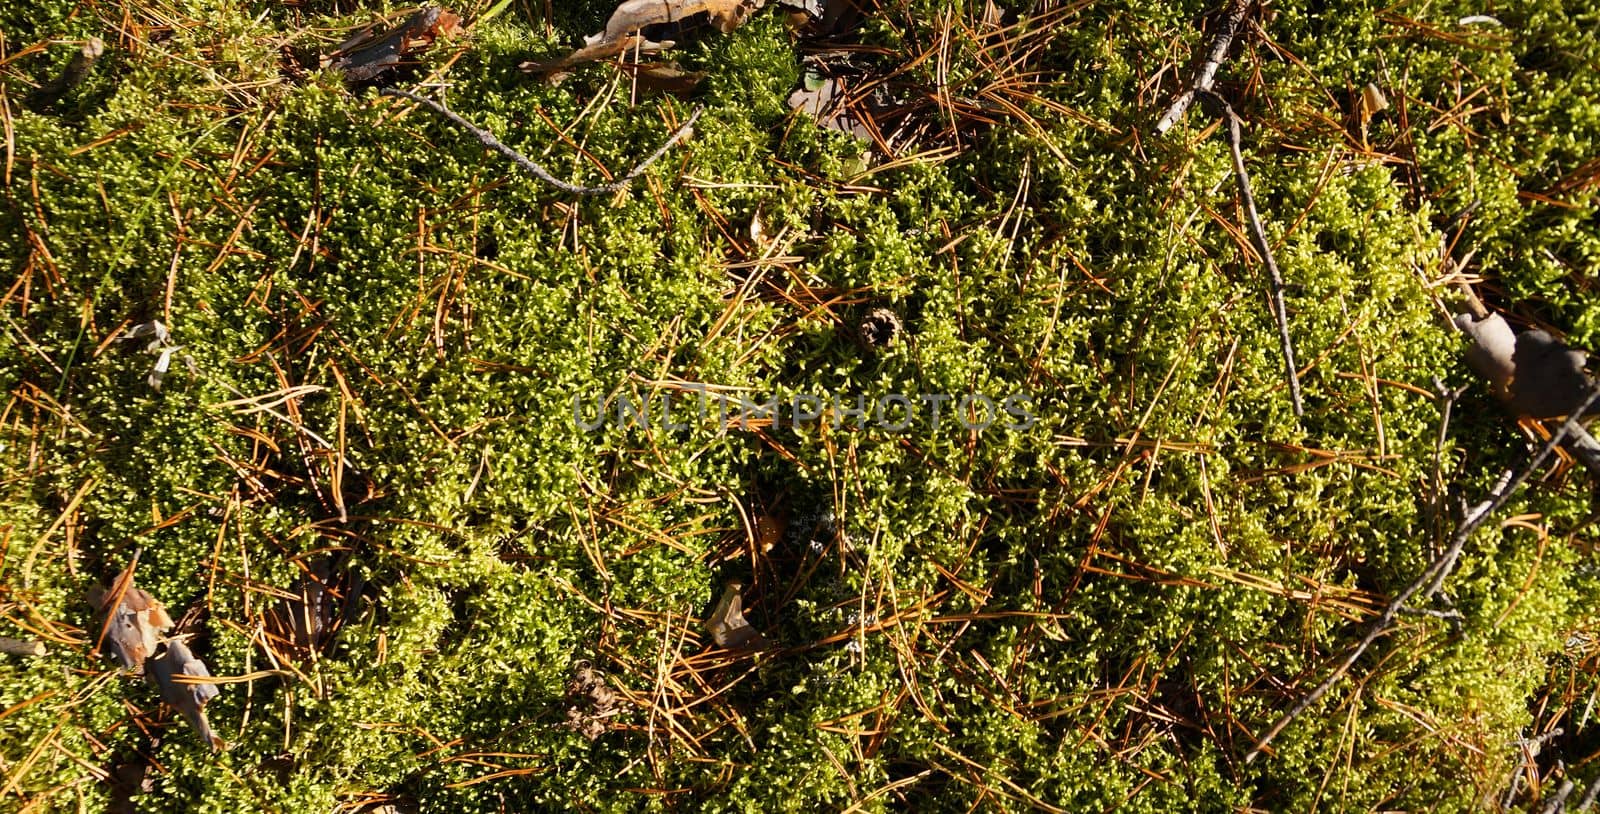 green forest moss under pine needles in sunlight for natural background close-up